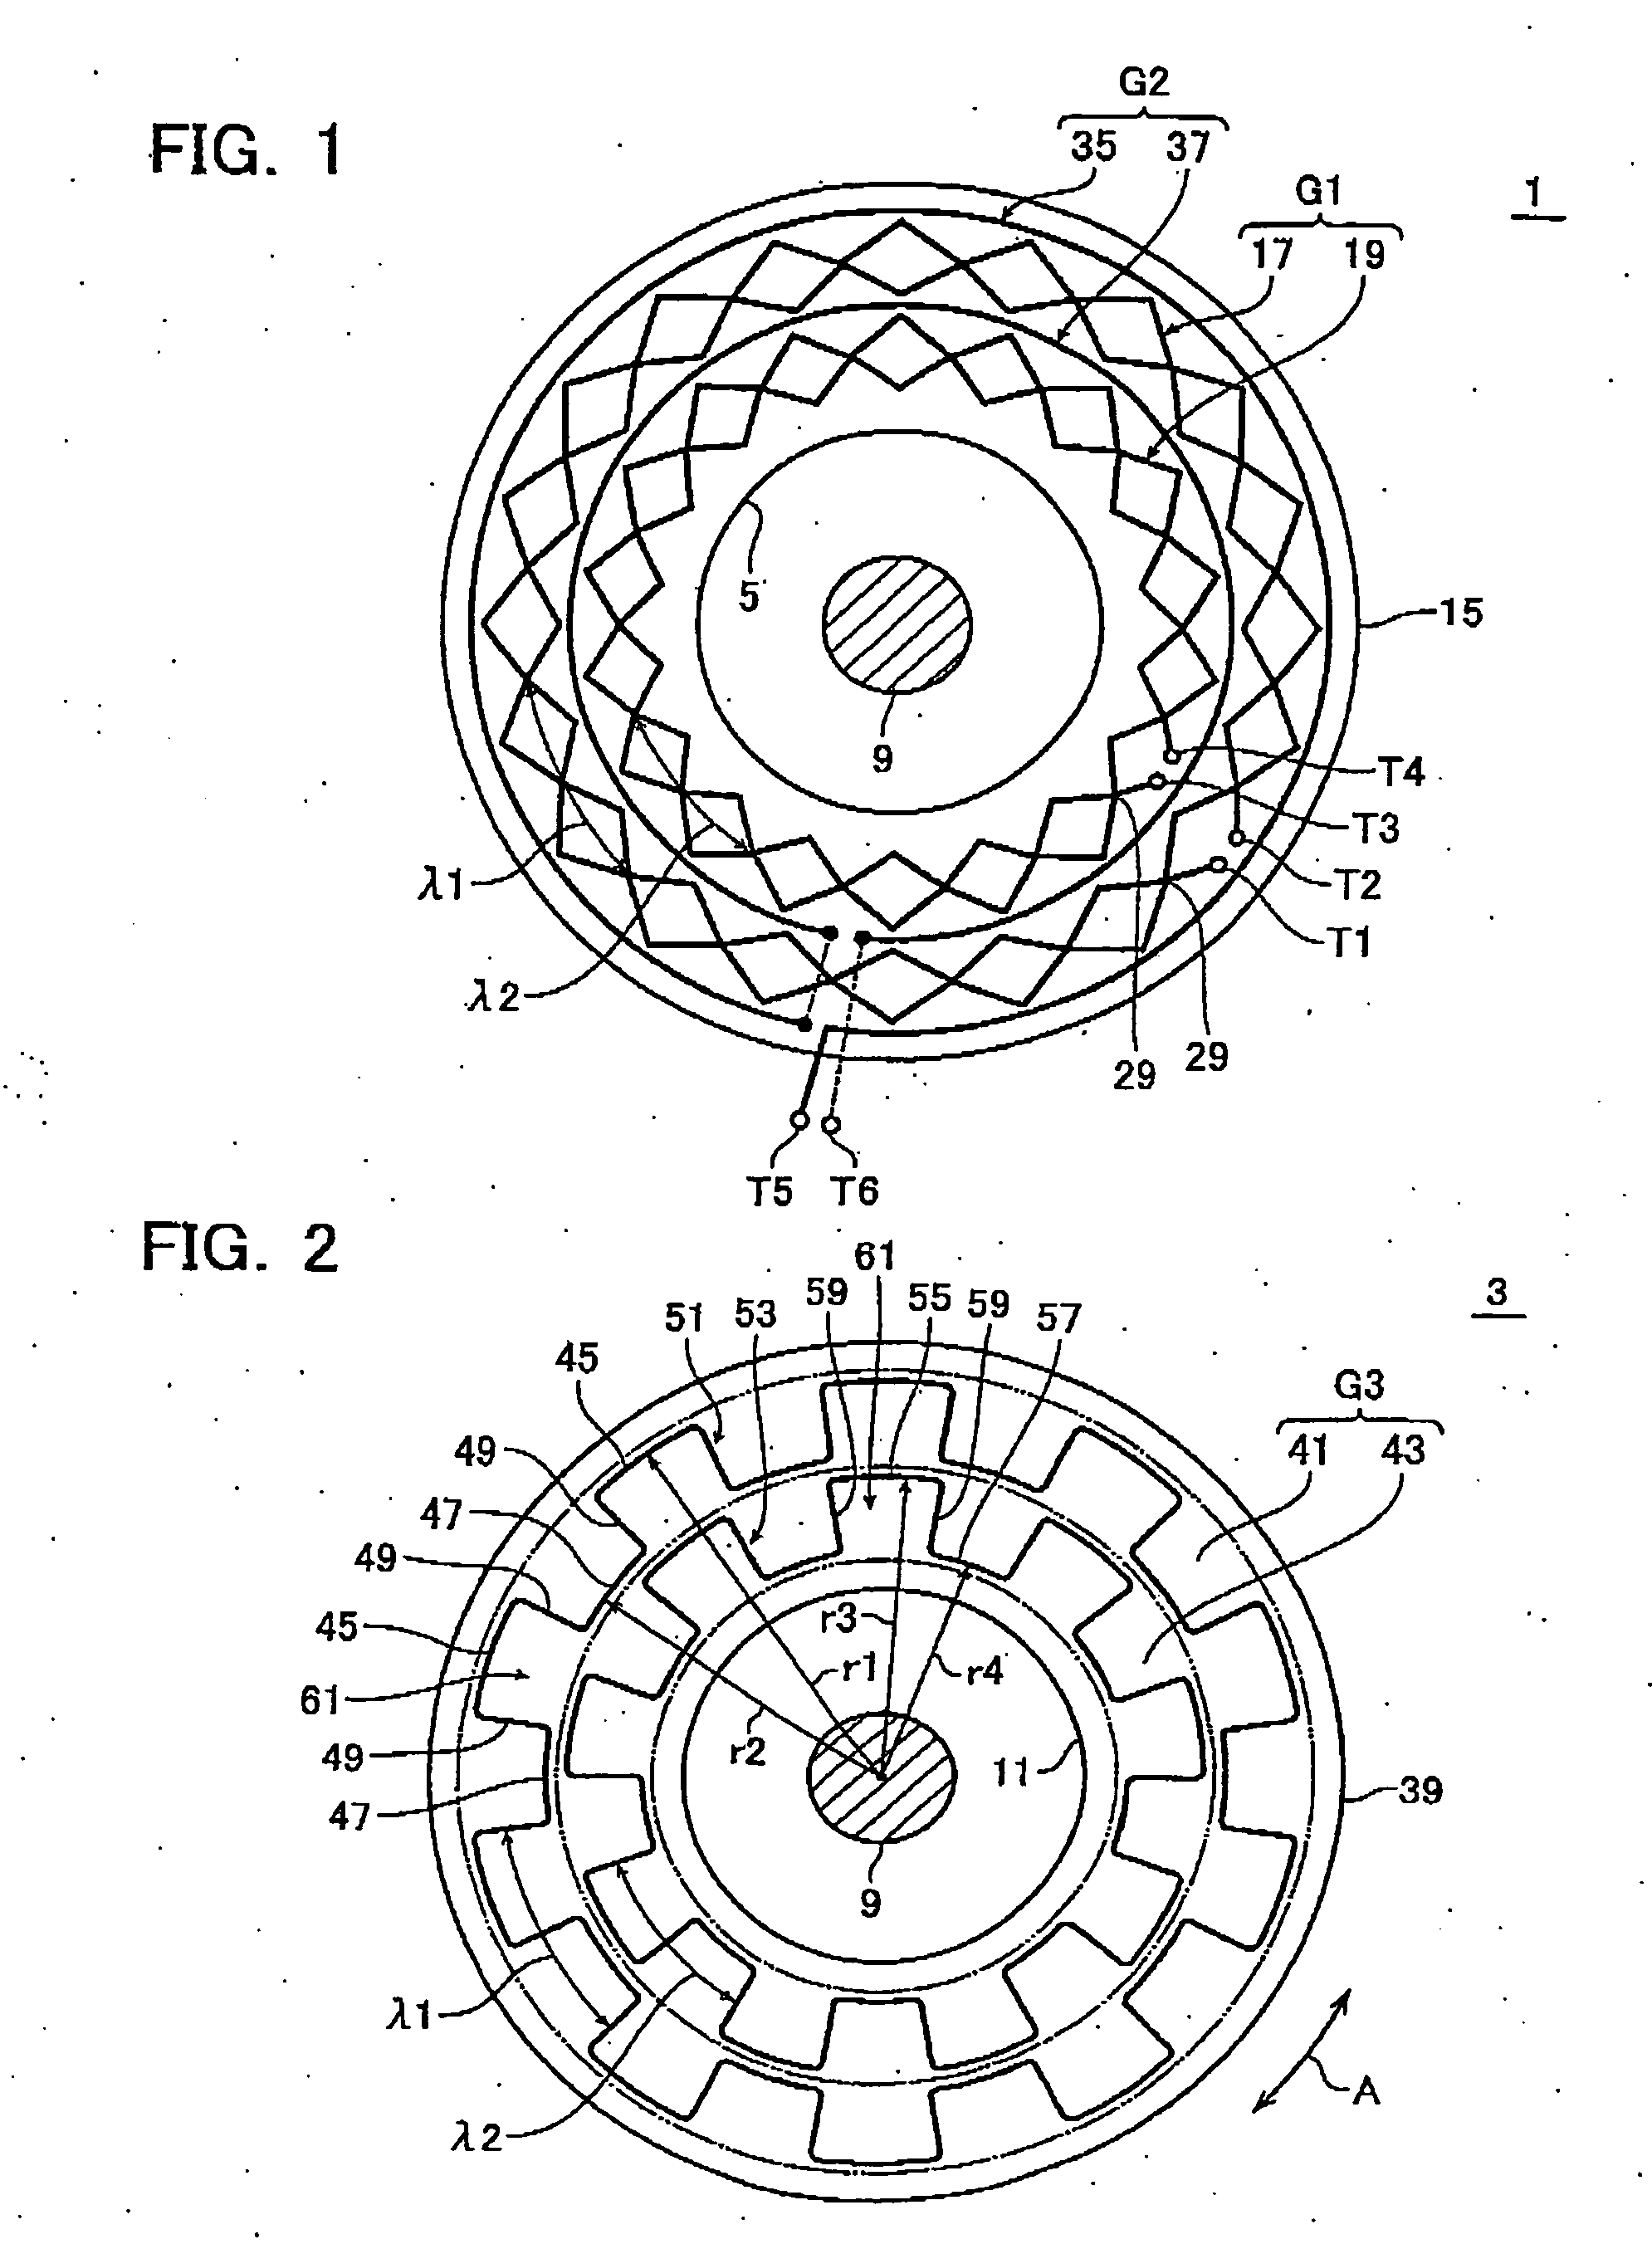 Absolute rotary encoder and micrometer